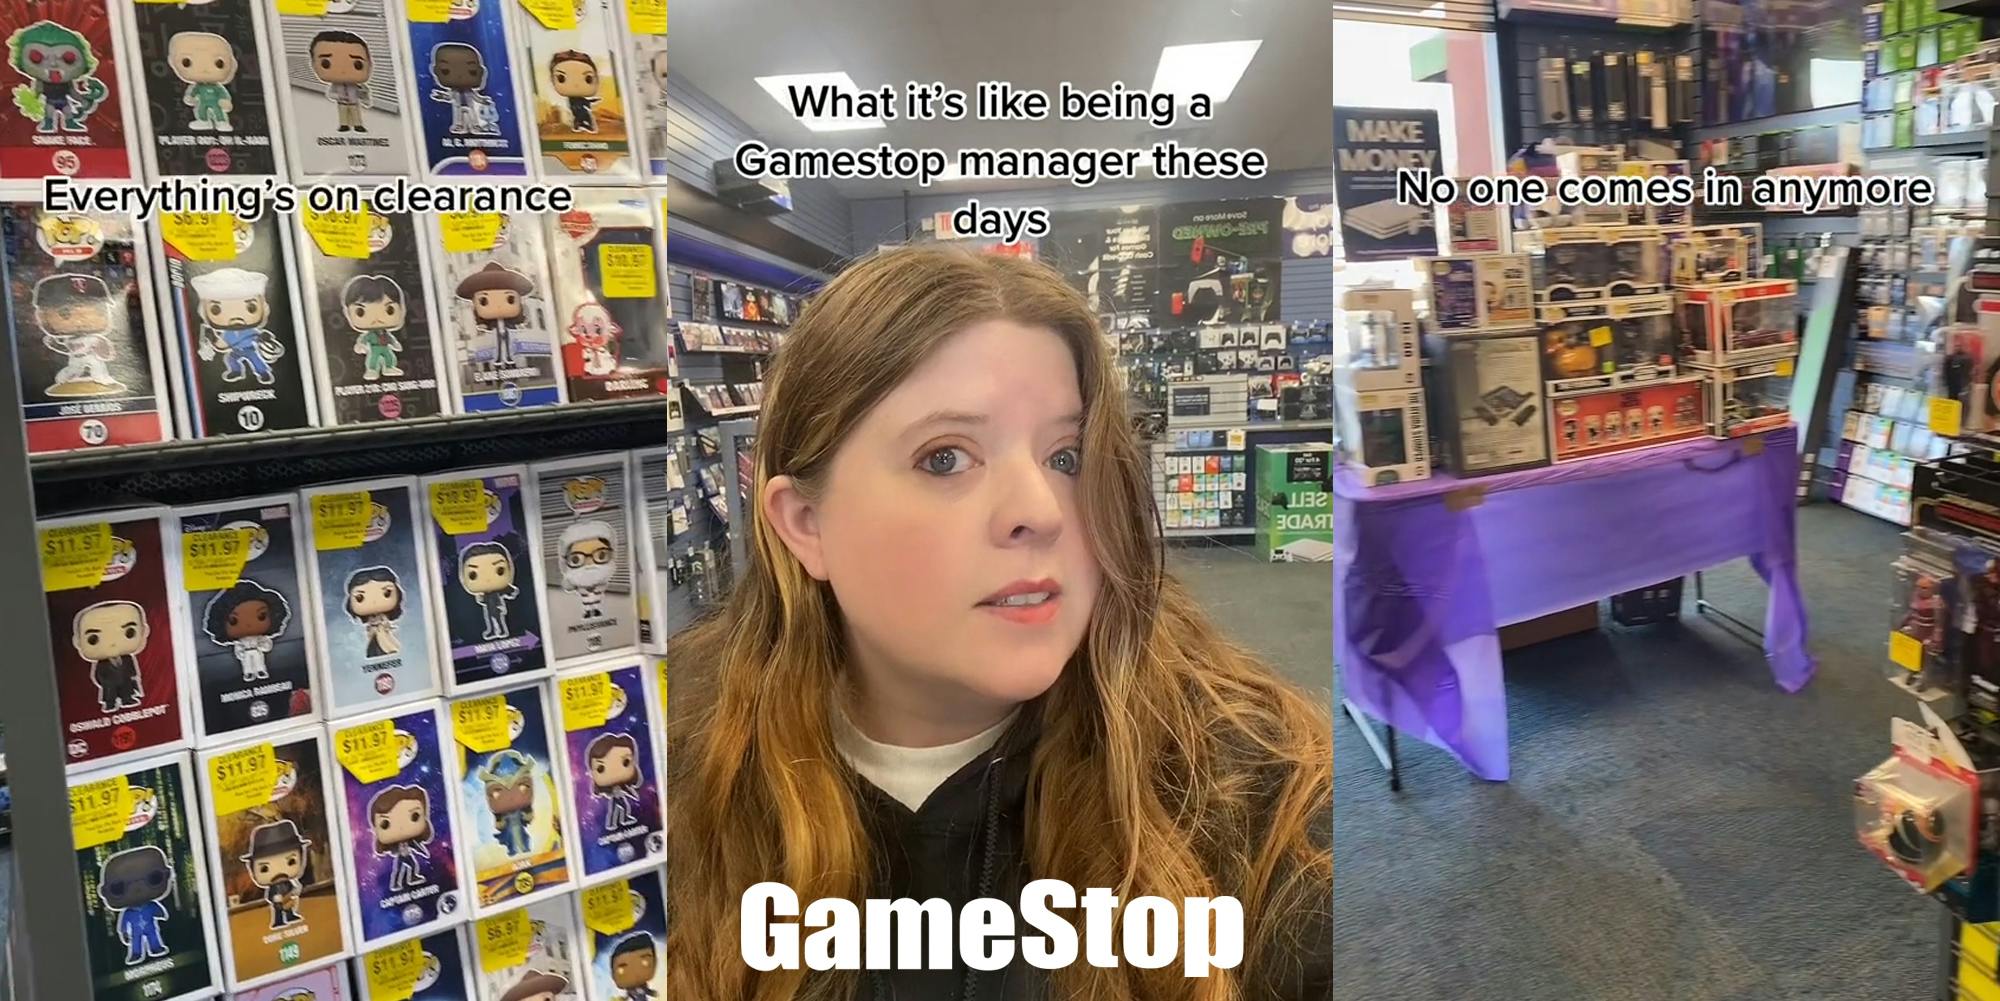 Game Stop Funko Pop shelf with caption "Everything's on clearance" (l) Game Stop employee speaking with caption "What it's like being a GameStop manager these days" with Game Stop logo at bottom (c) Game Stop displays with caption "No one comes in anymore" (r)